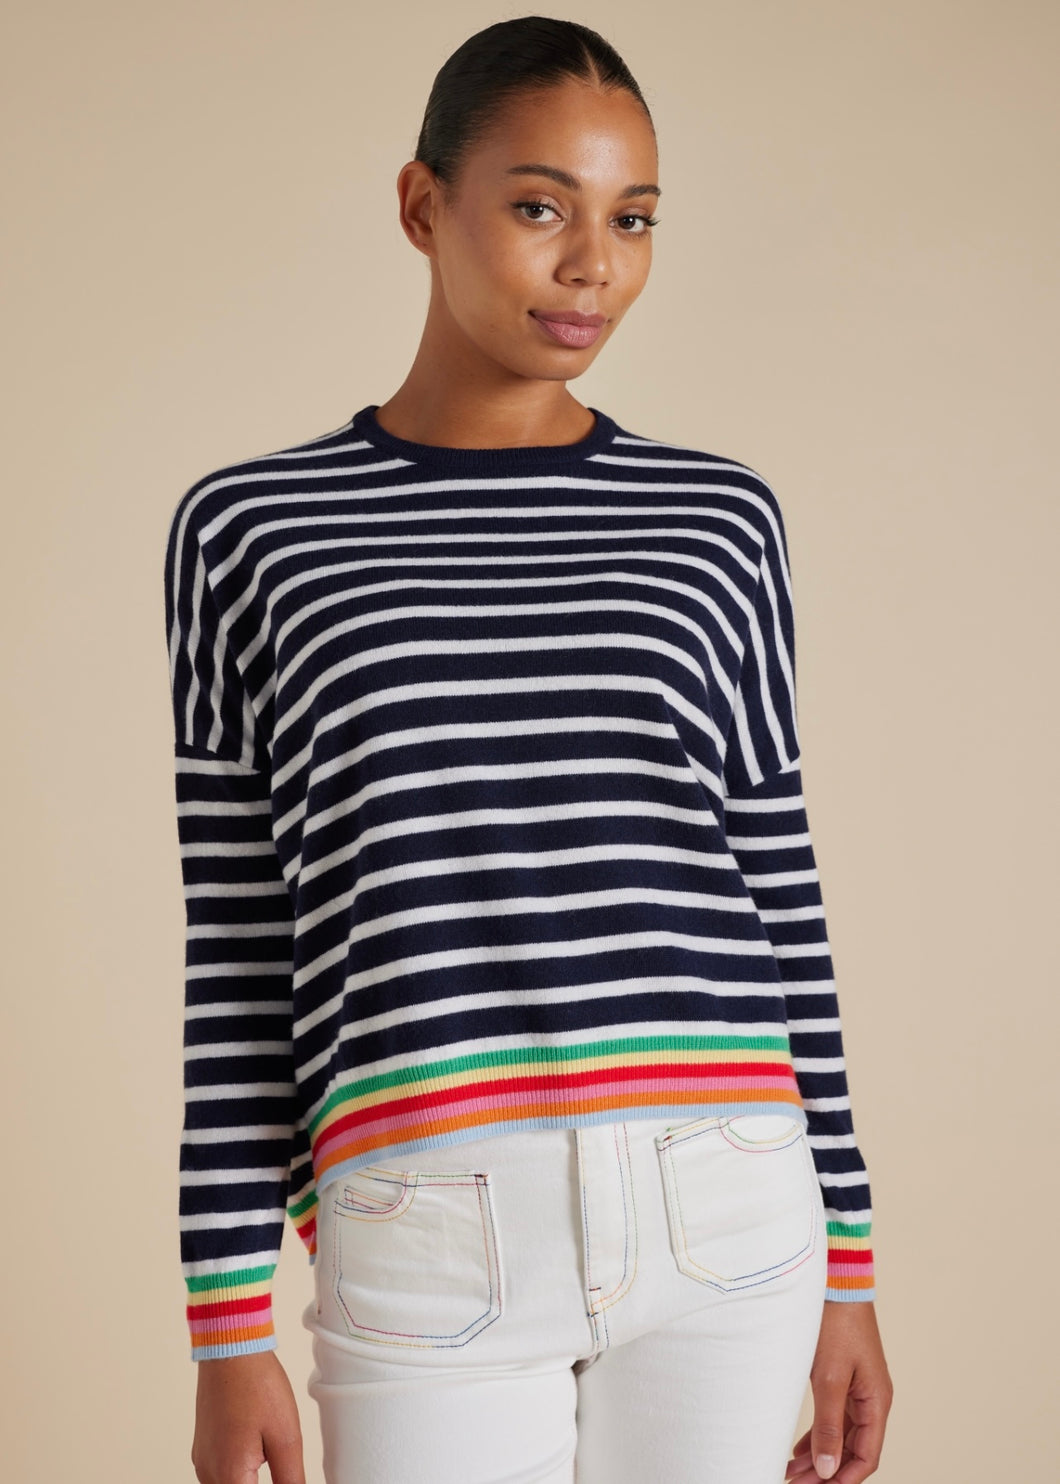 Colette Sweater in Officer Navy by Alessandra